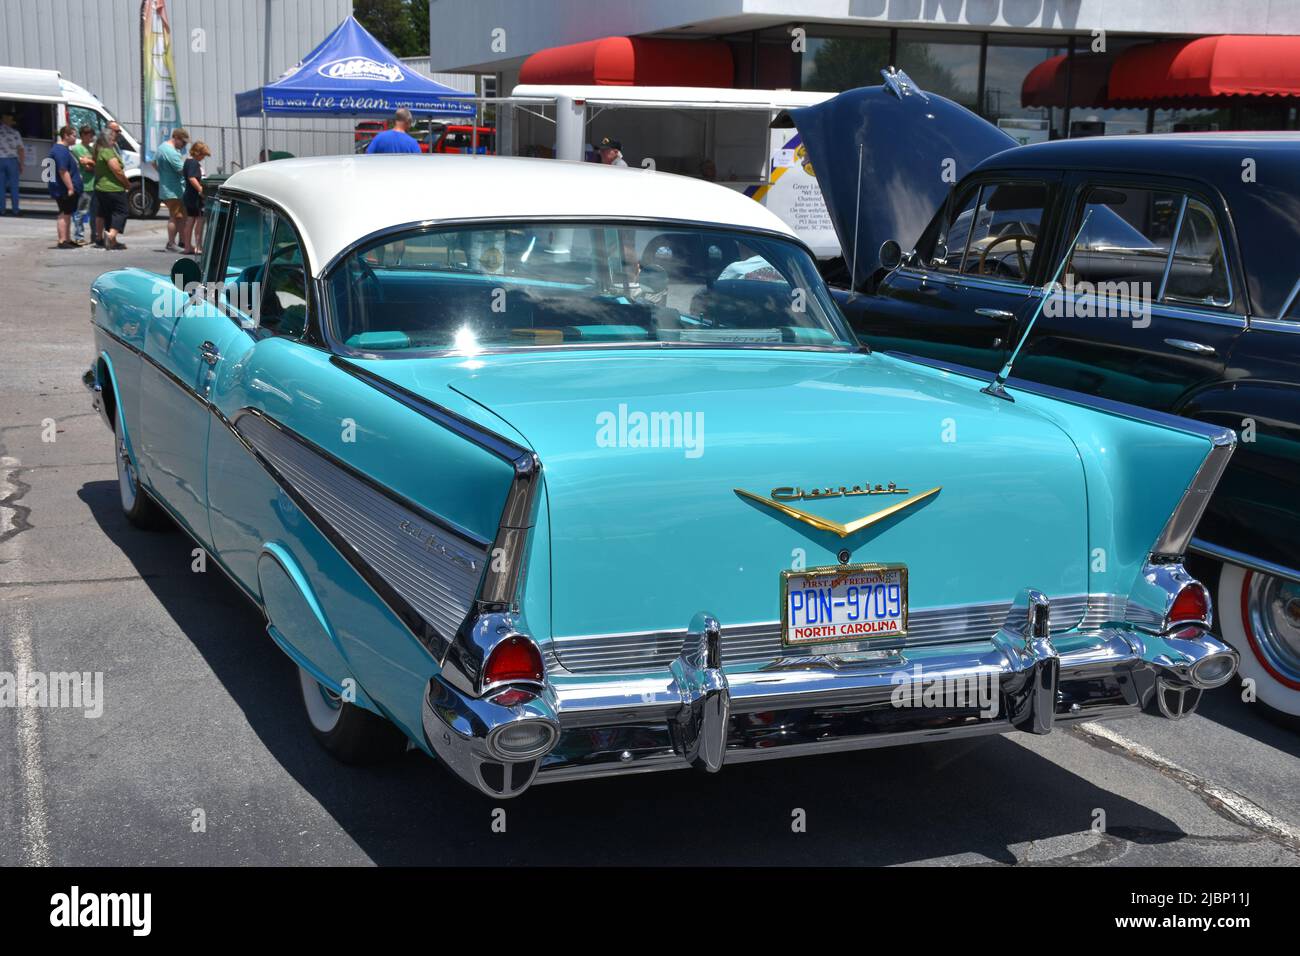 A 1957 Chevrolet Belair Hardtop on display at a car show. Stock Photo